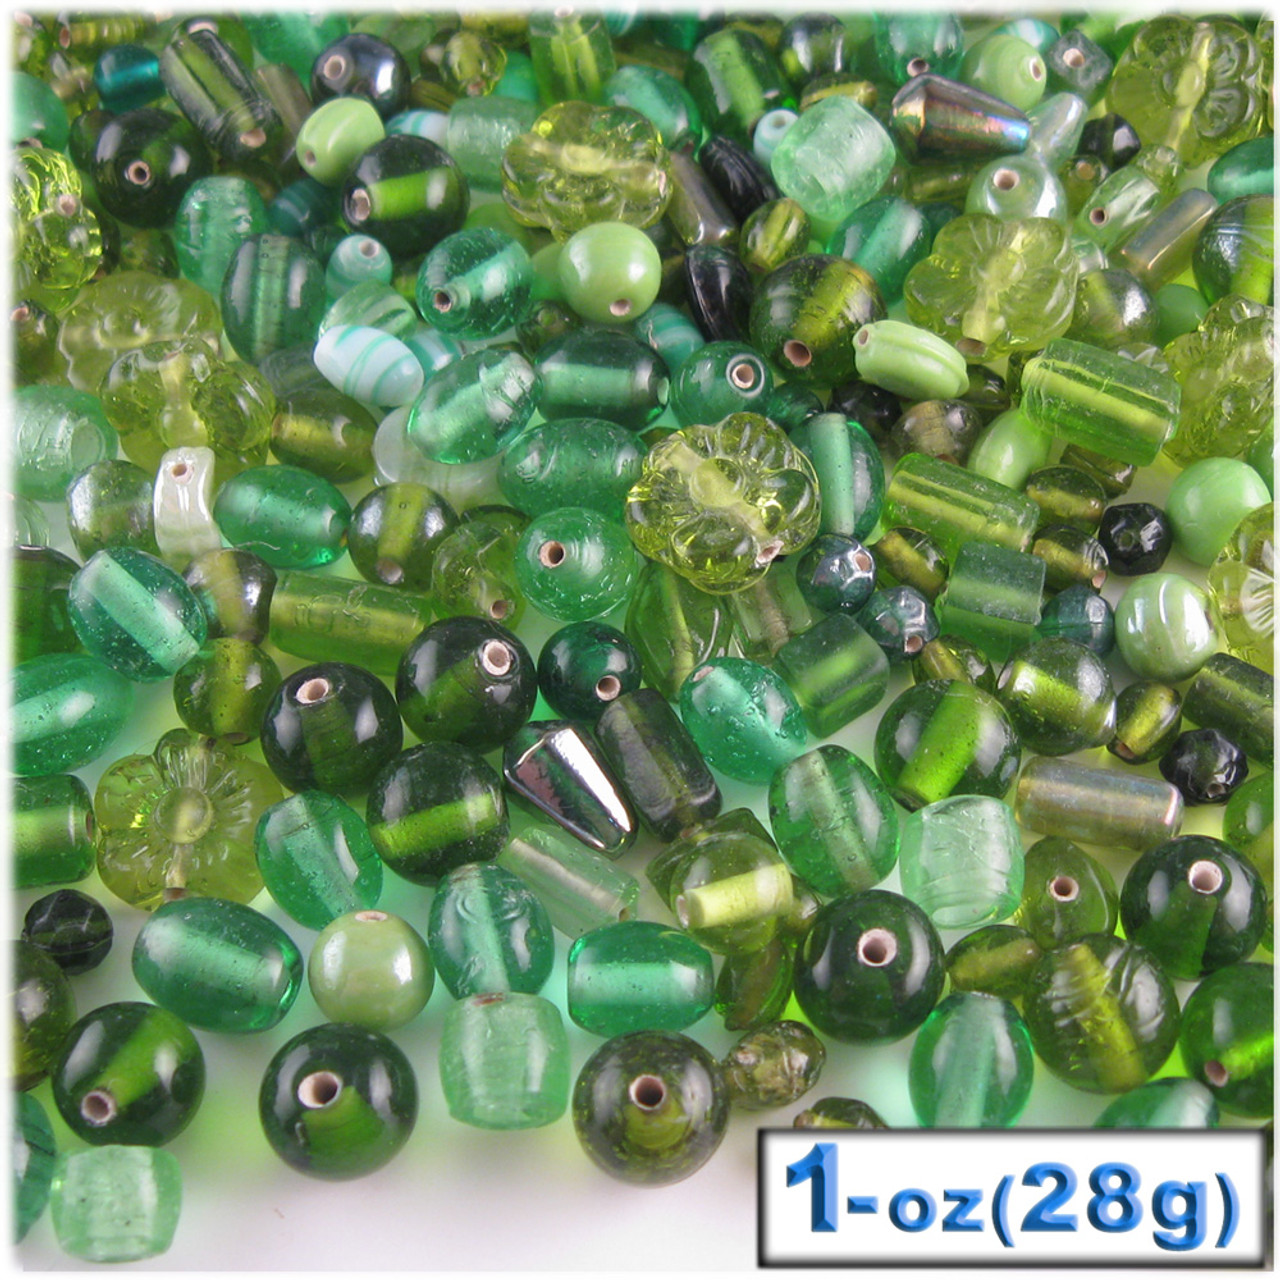 SUPPLY: 60pcs Mixed Dark Green Family Glass Beads BULK Assorted Shapes  Beads Vintage Jewelry Supplies 